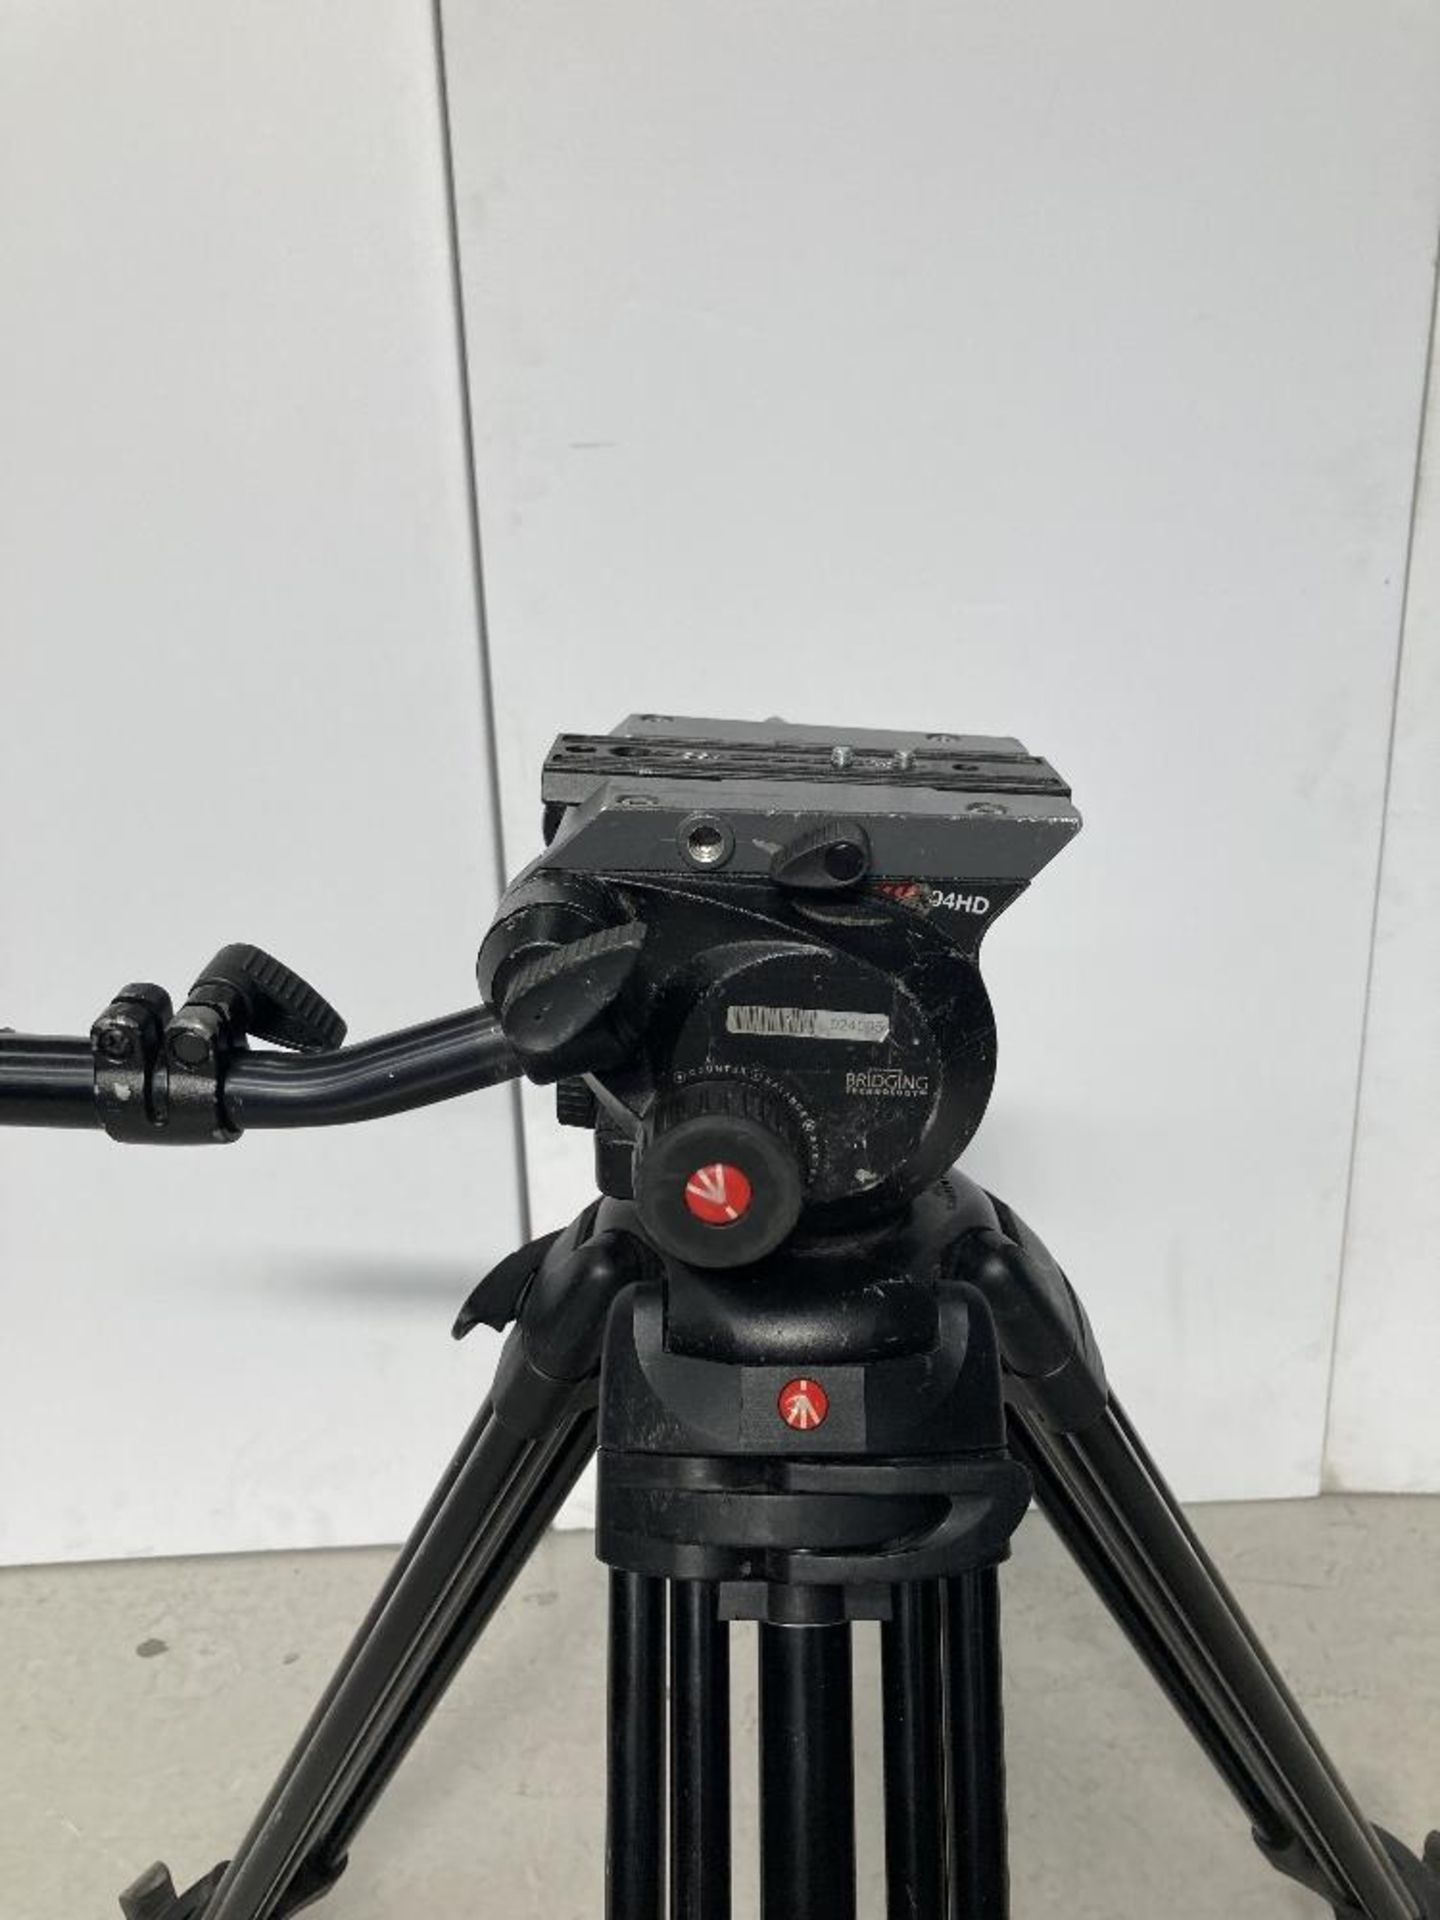 Manfrotto 504HD DV Tripod Head and 546GB Tripod with Carbon Fibre Legs with HPRC HP Case - Image 3 of 6